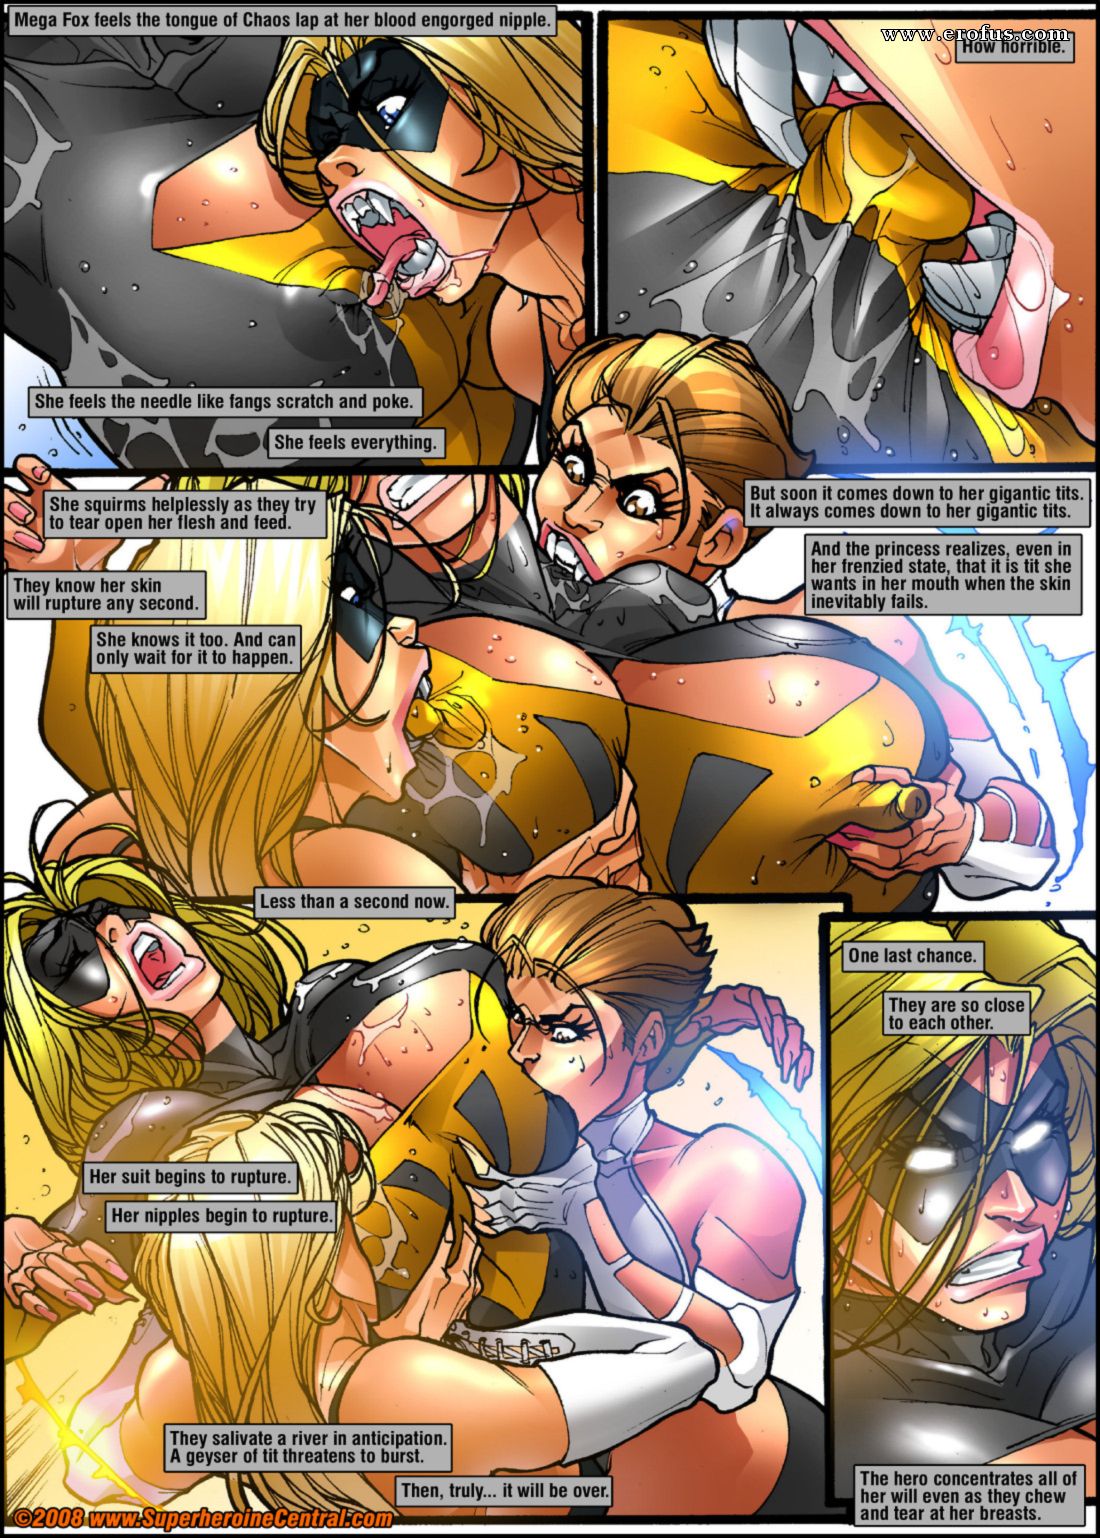 picture Mega Fox - Victory Showcase_Page_24.jpg